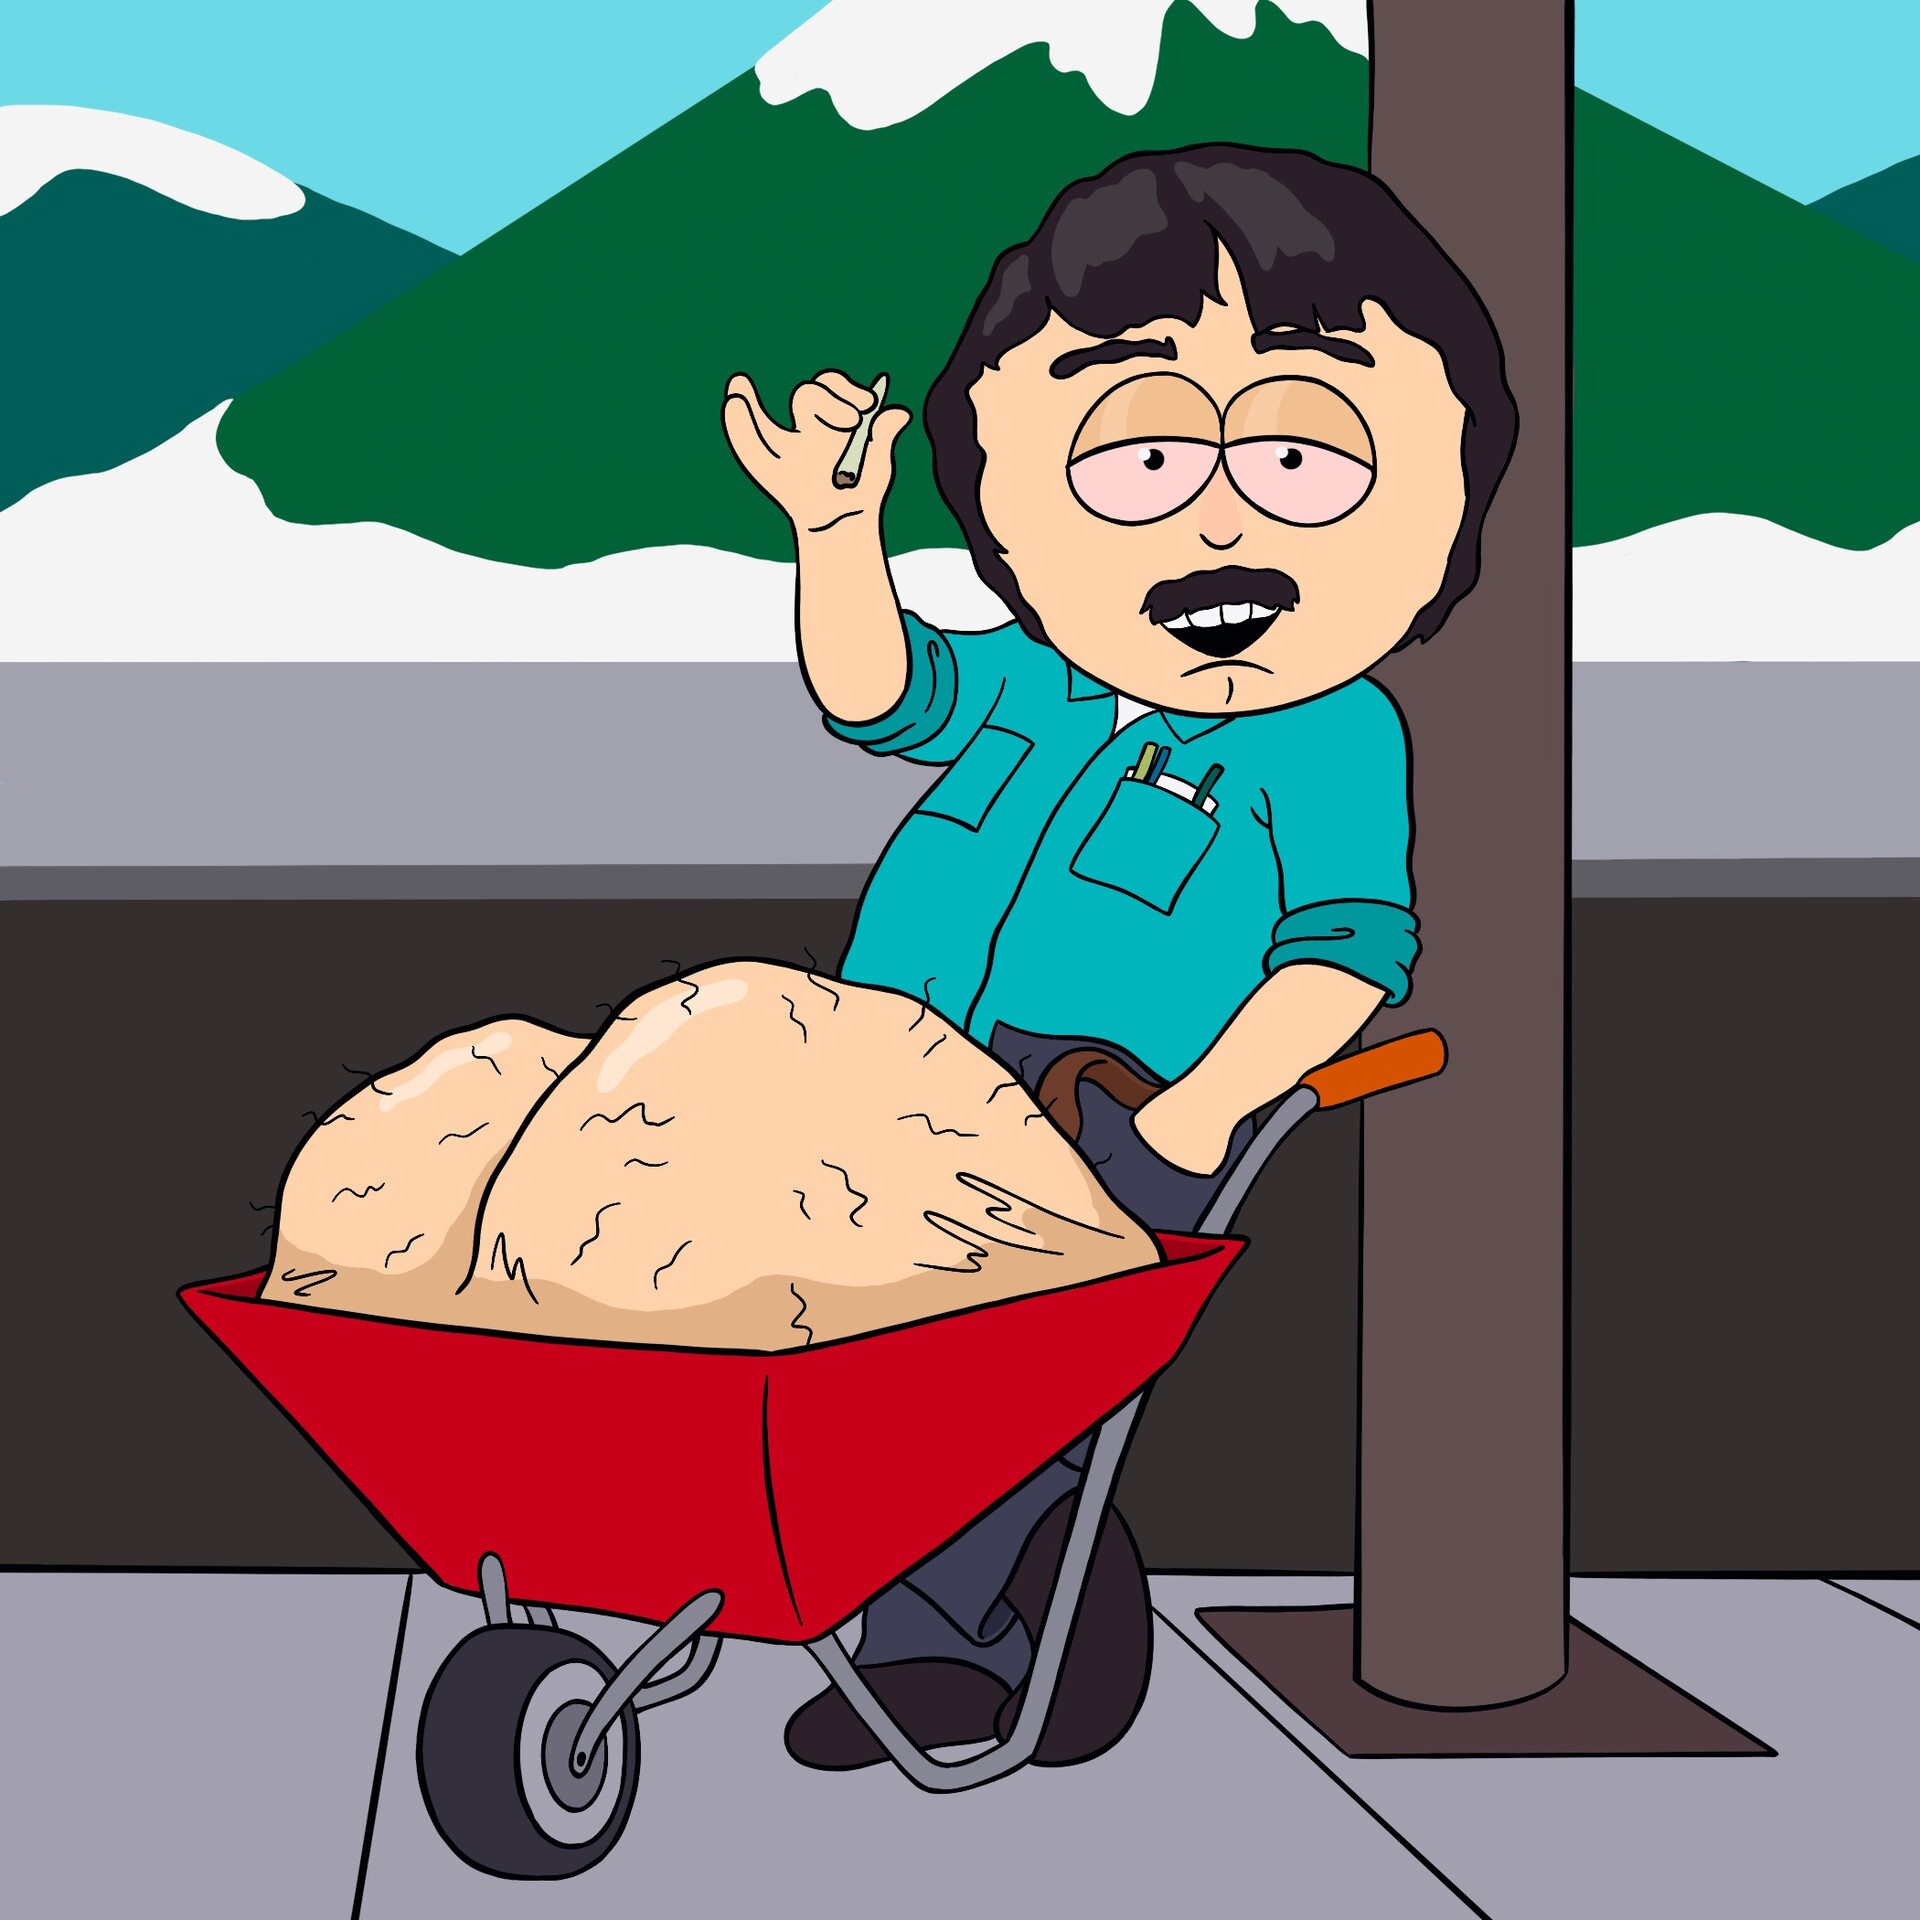 I drew one of my favorite characters ever, Randy Marsh.